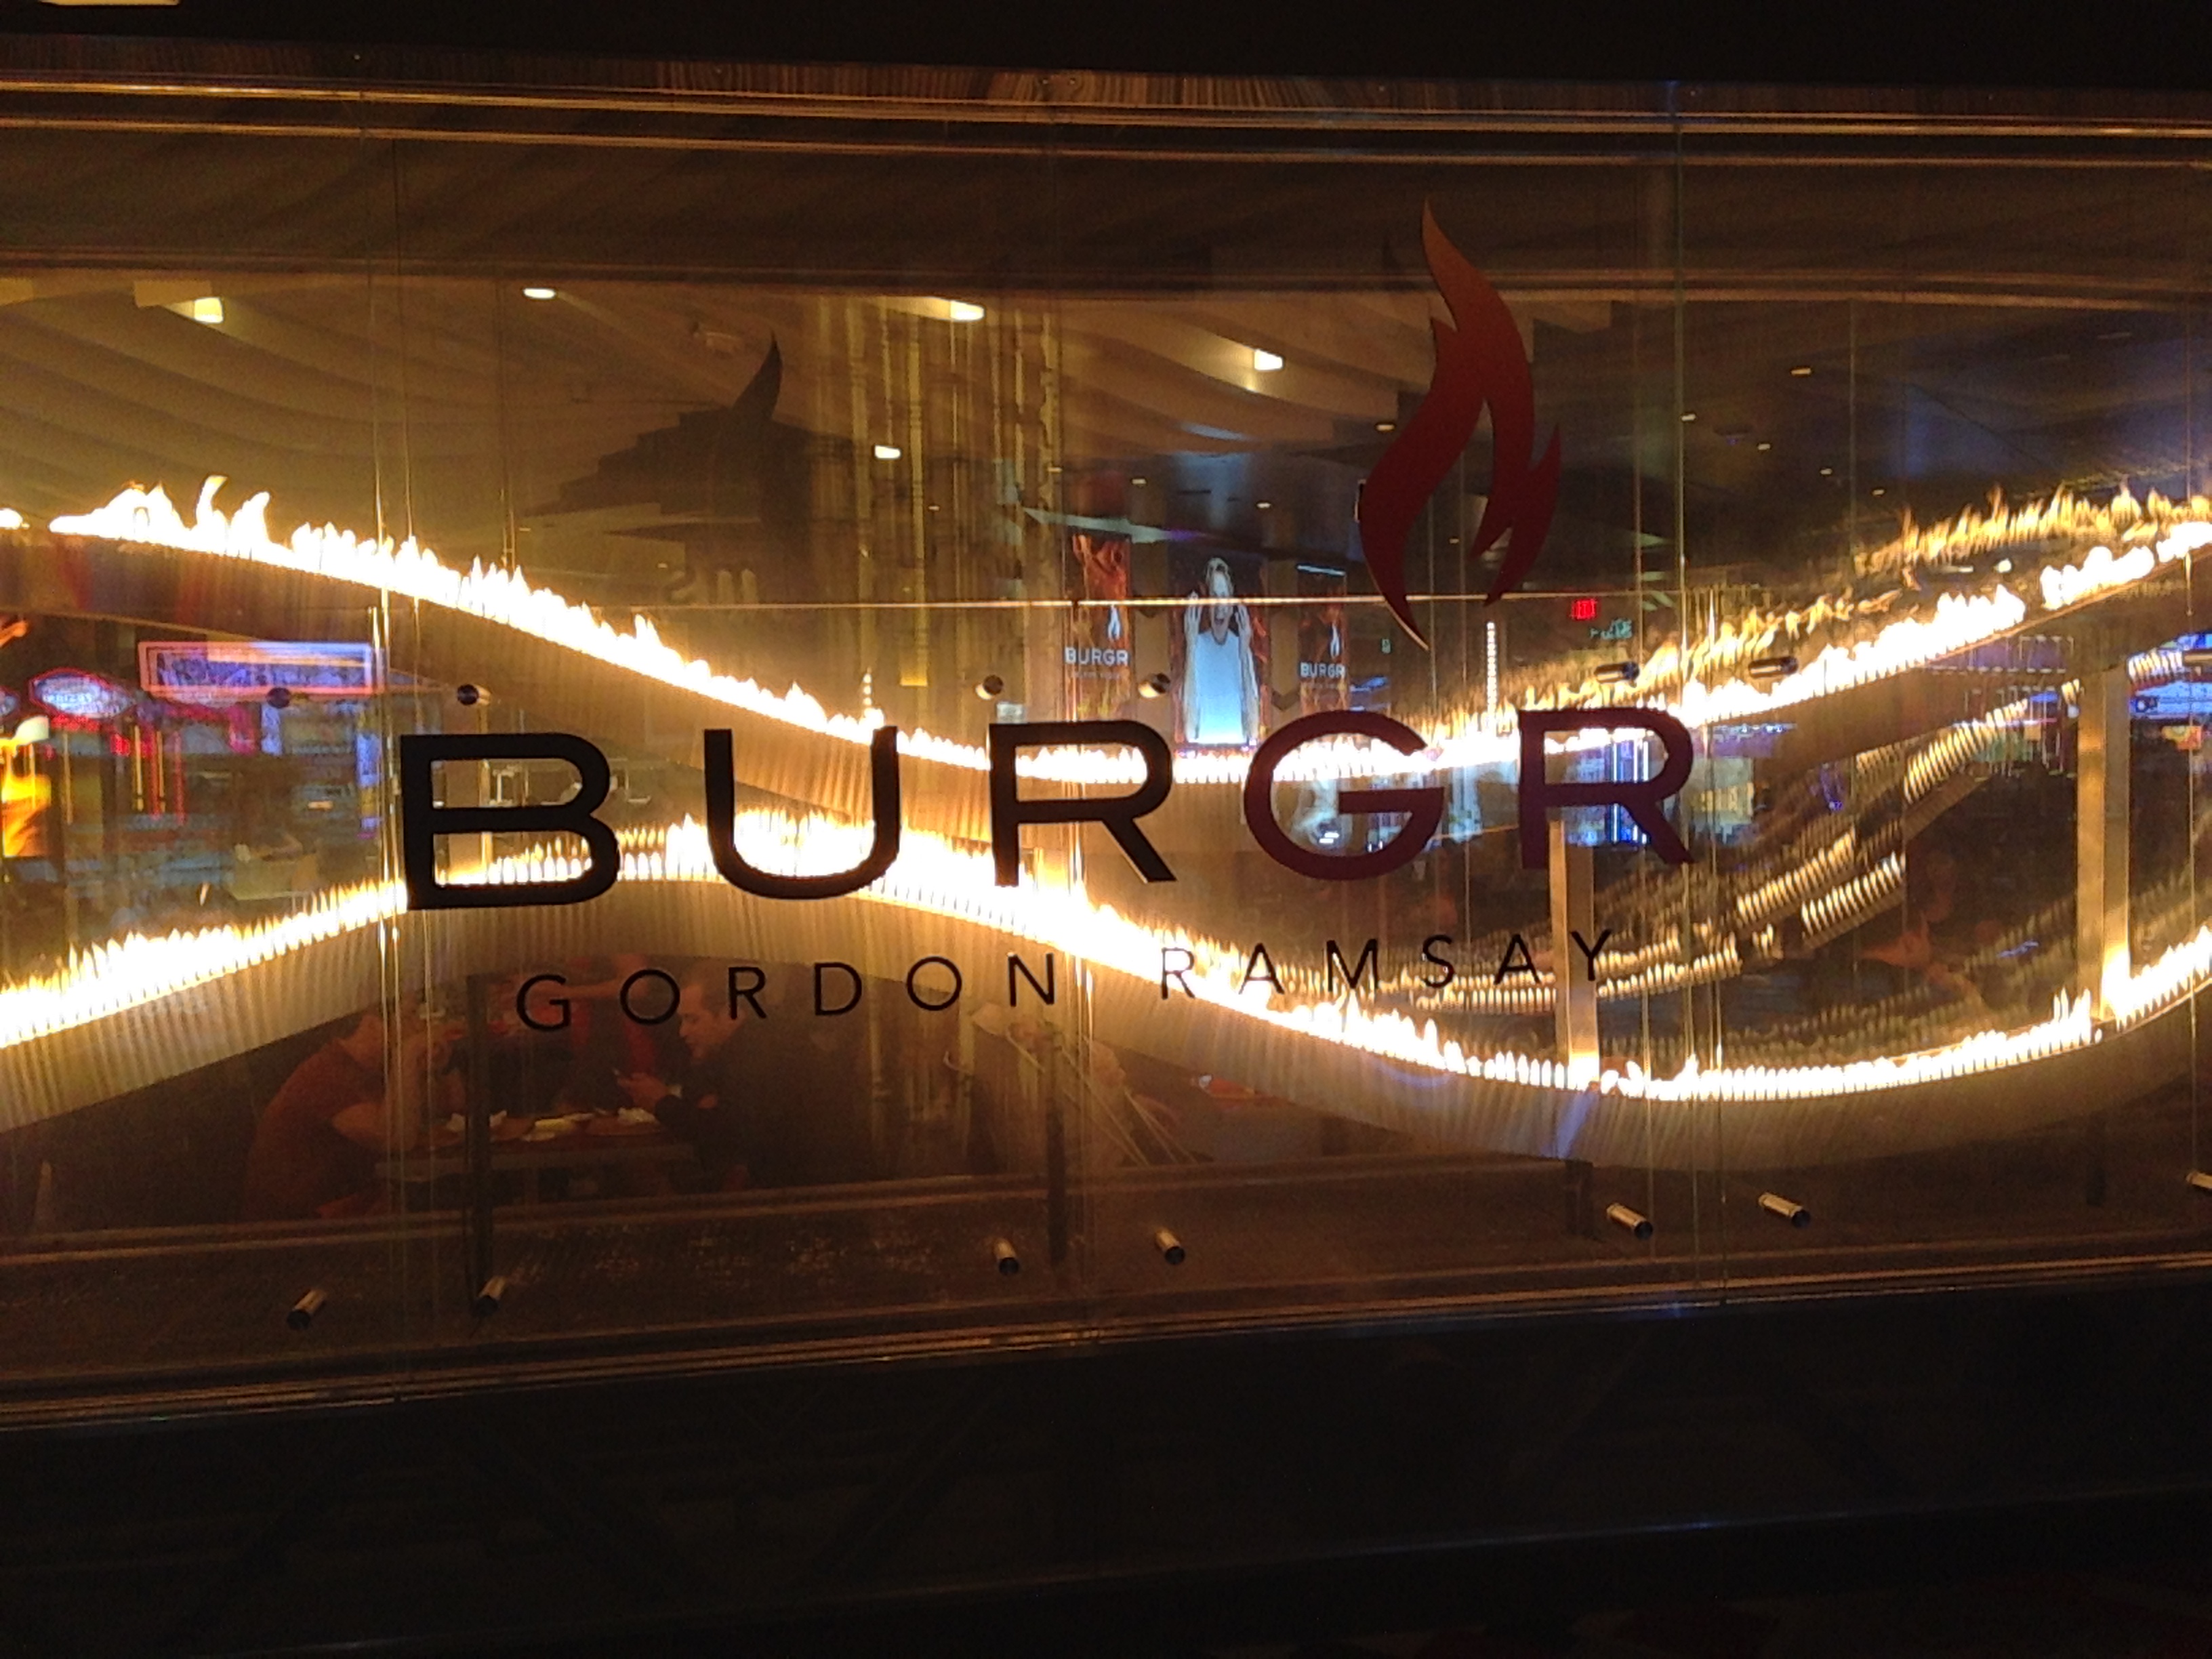 This is a window from the Planet Hollywood Casino, looking into the BURGR restaurant.